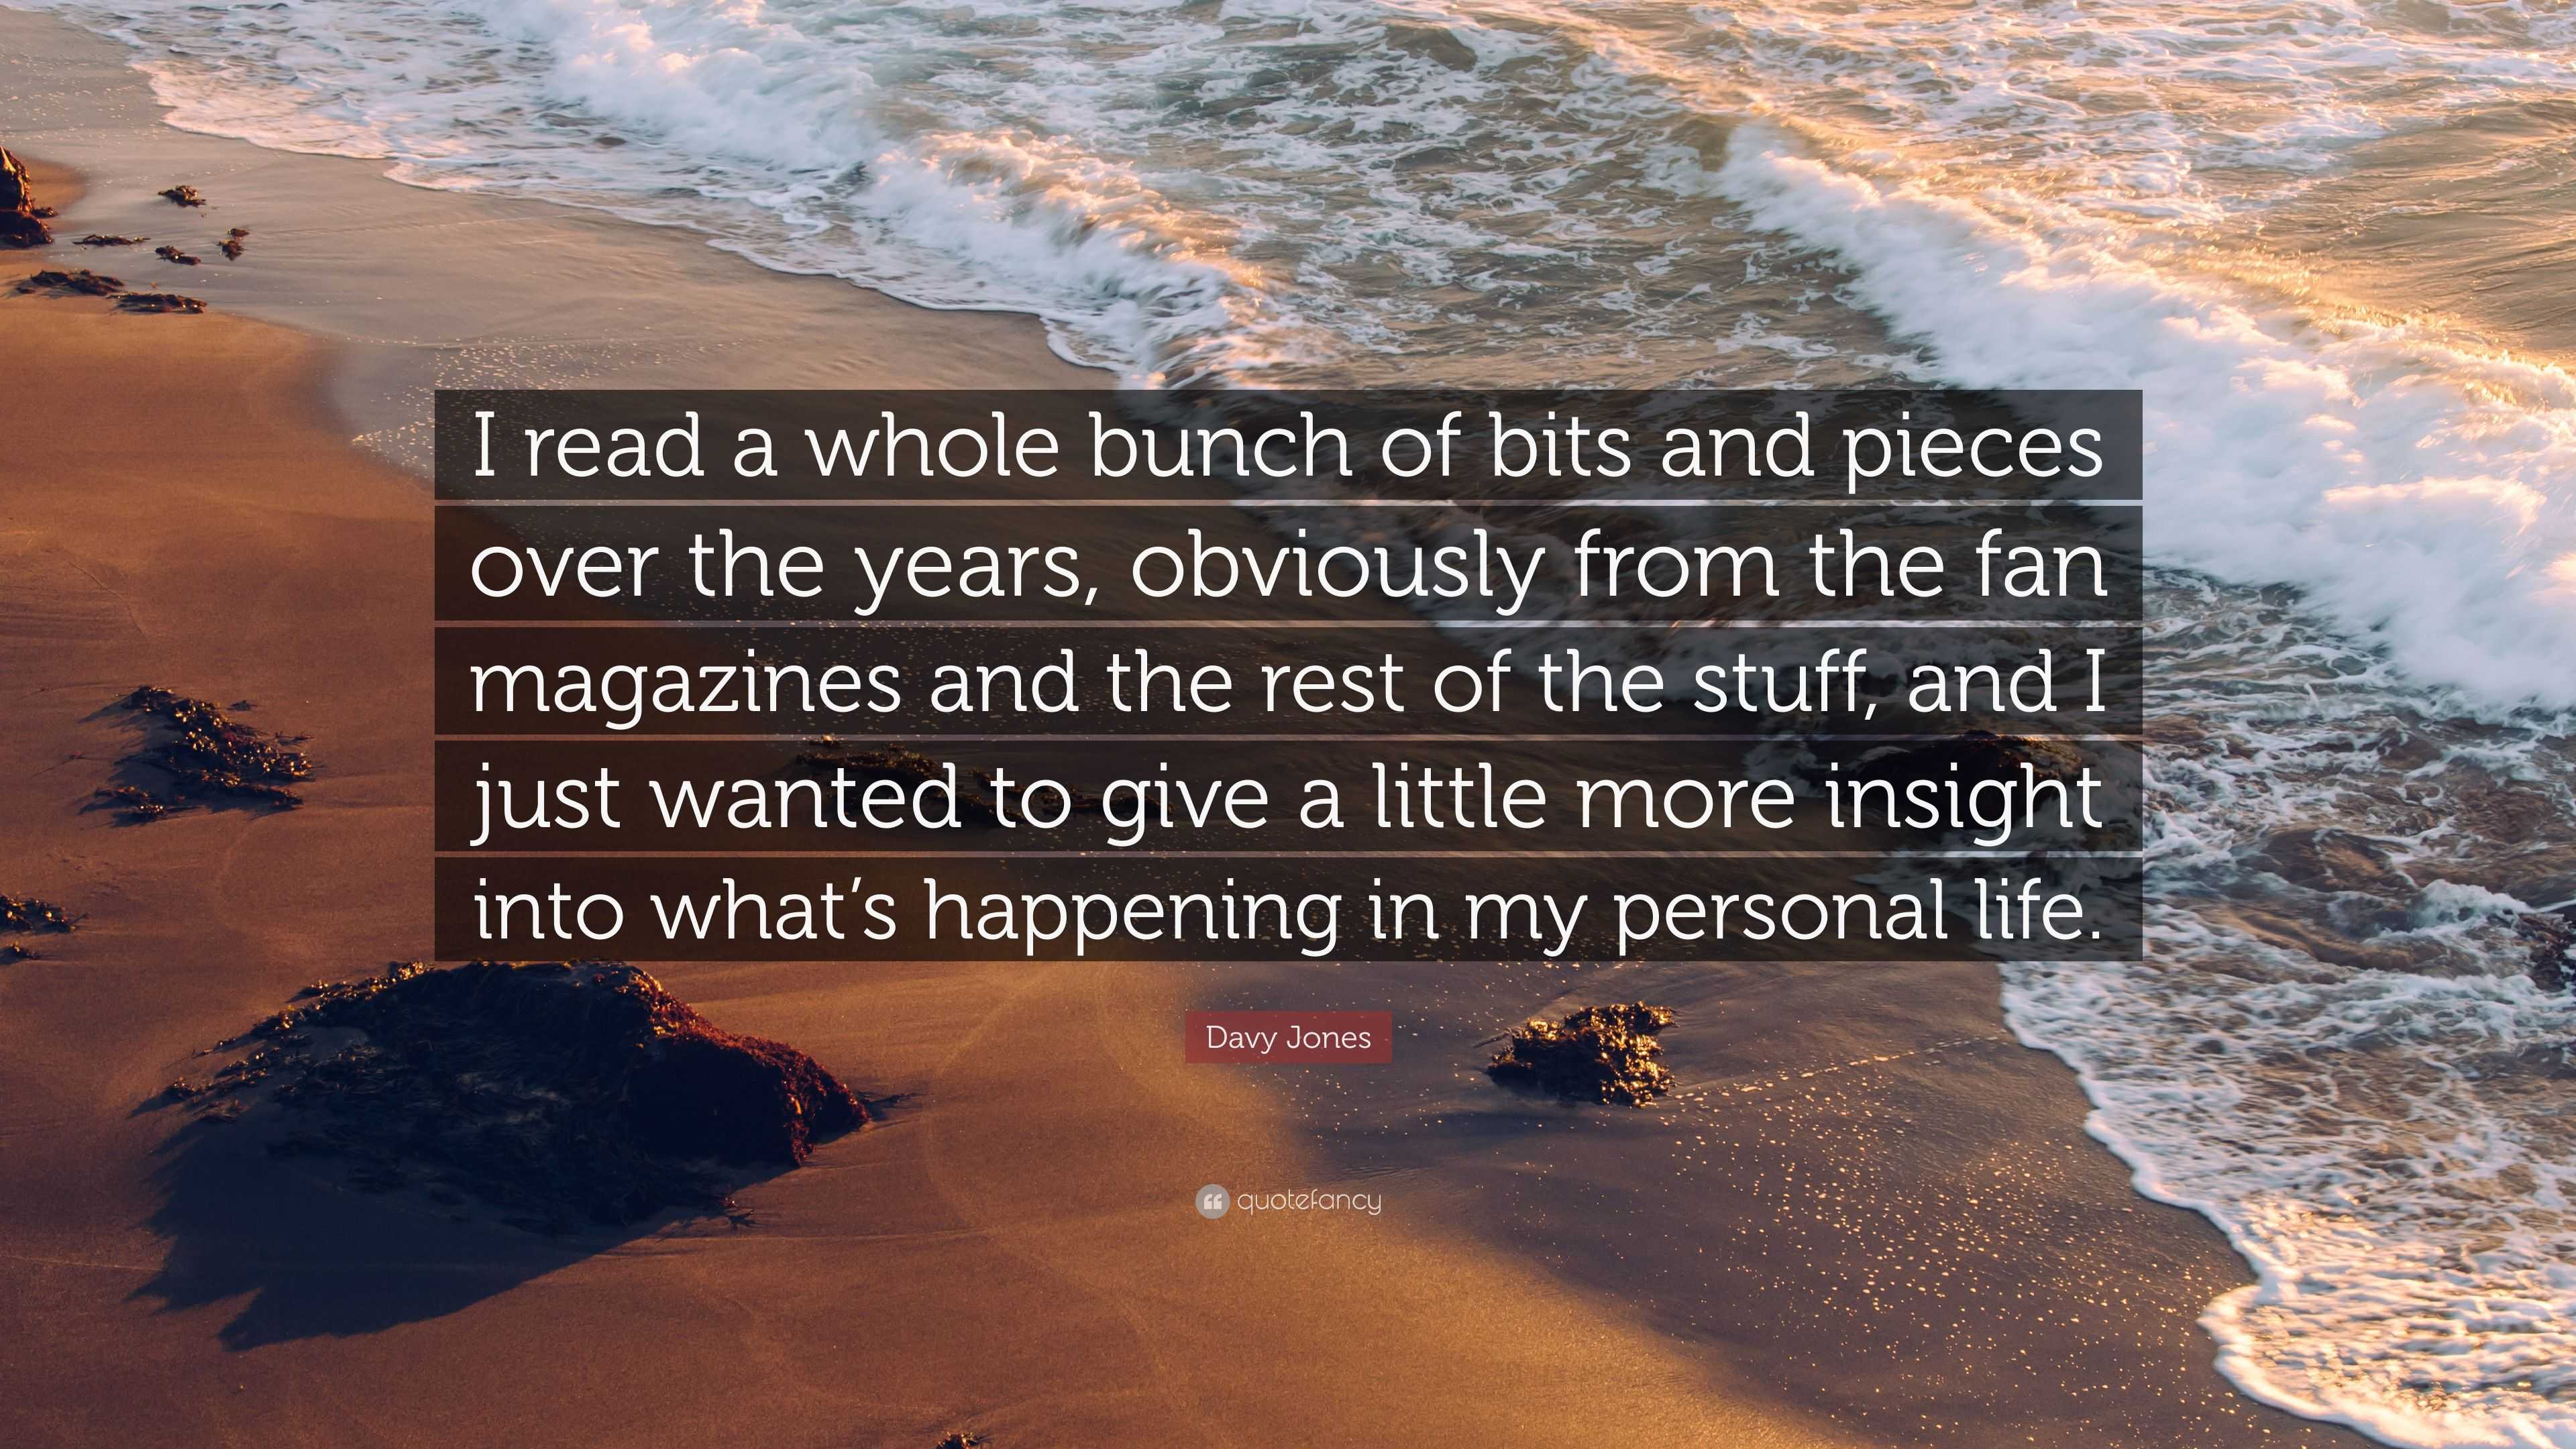 Davy Jones Quote: “I read a whole bunch of bits and pieces over the